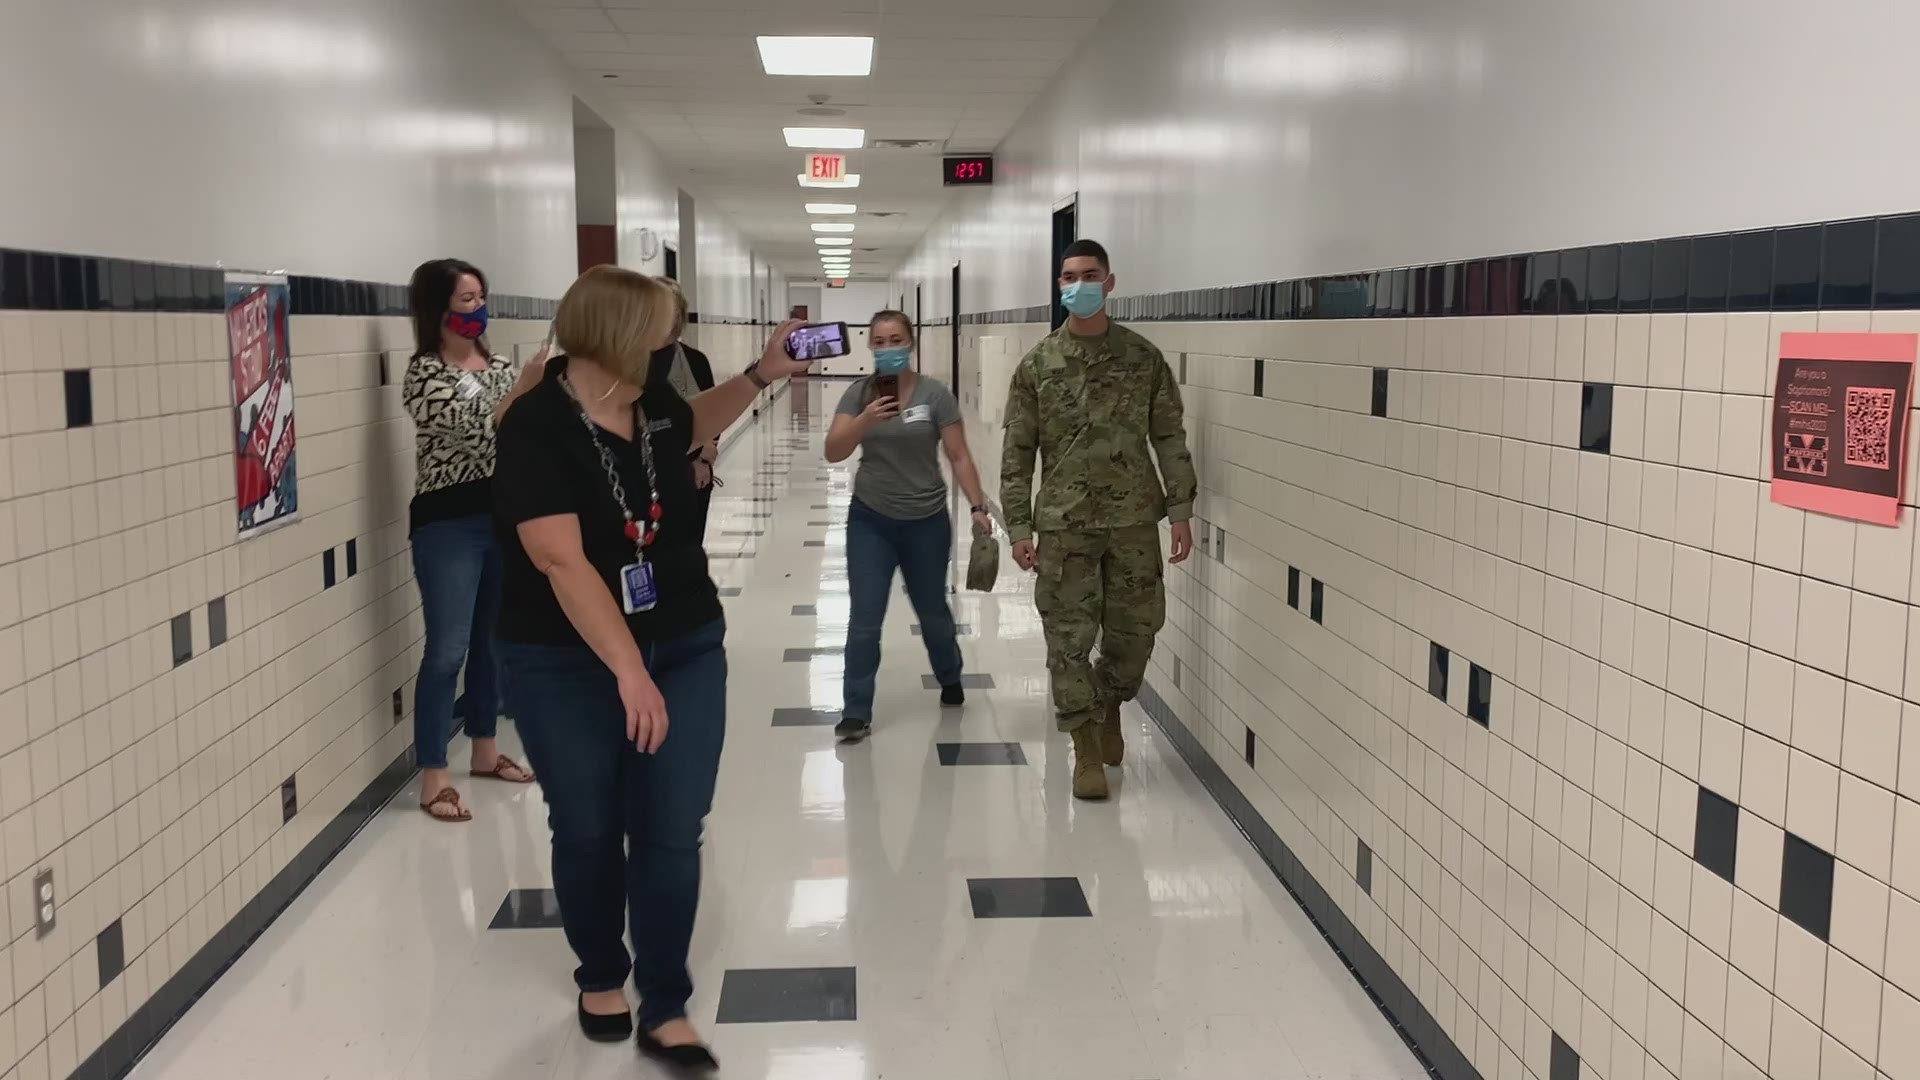 After spending the last half-year at basic training, Caden Wulf planned a big surprise for his return home. (Video provided by Alvin ISD)